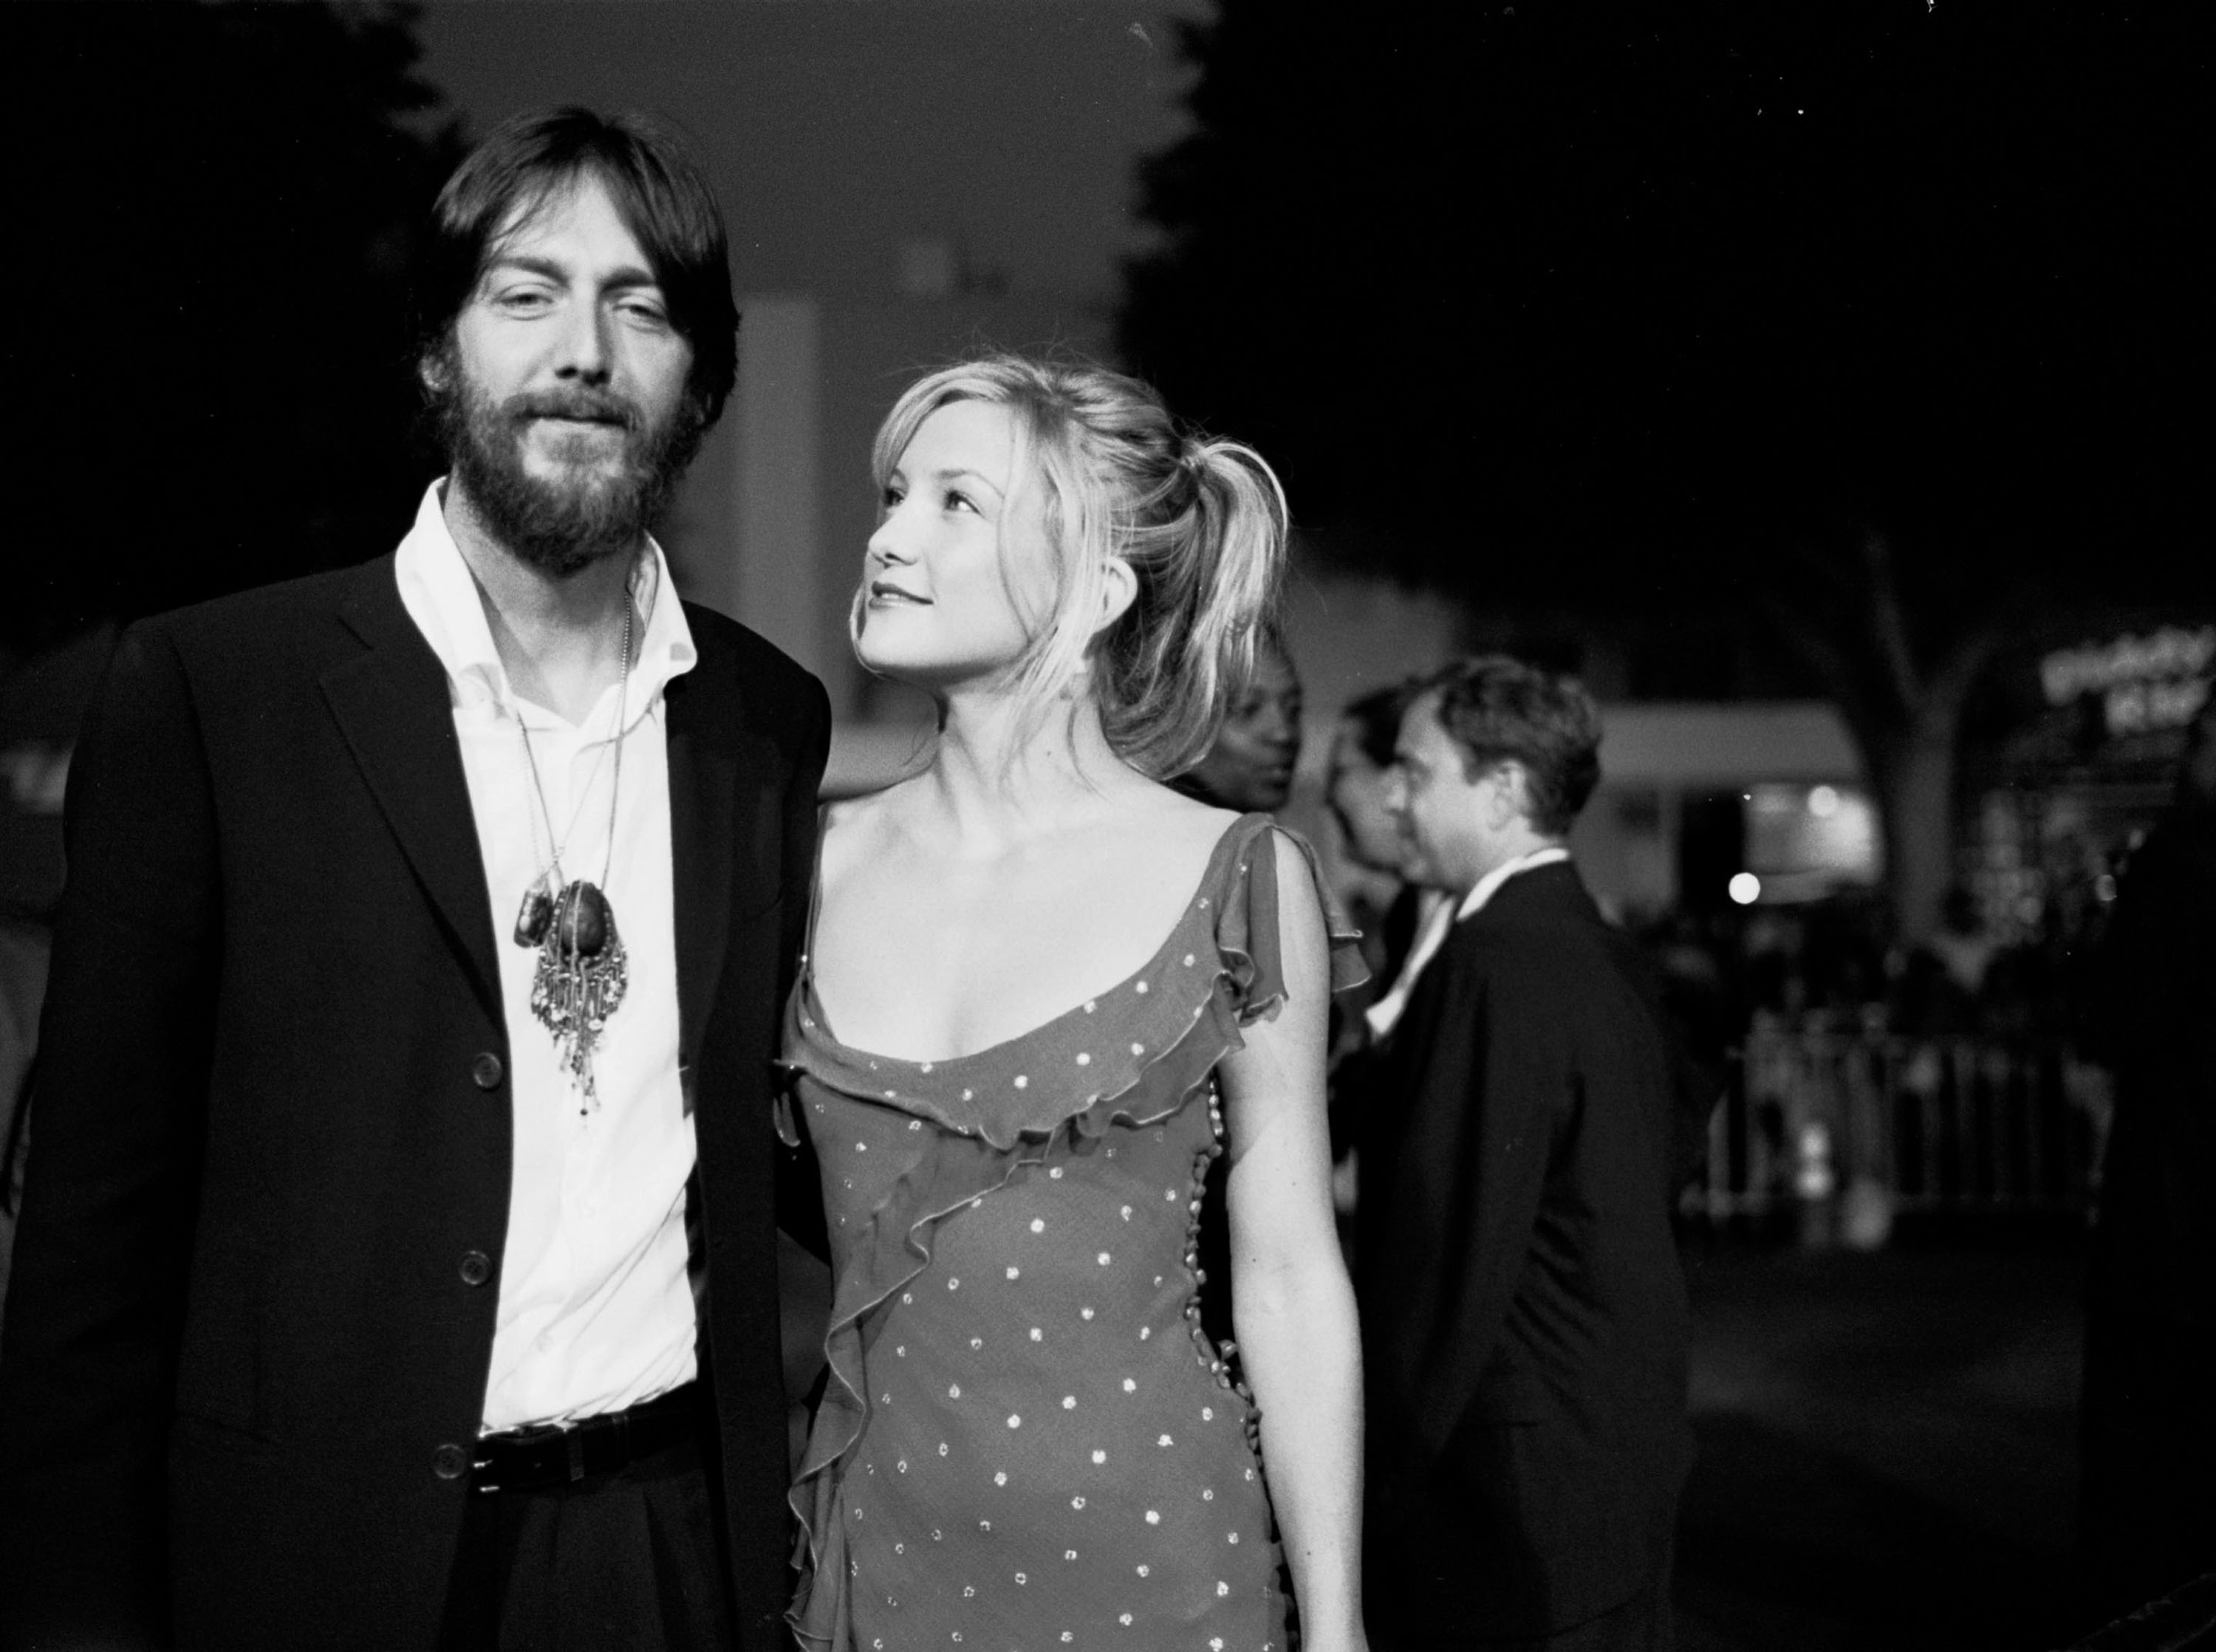 Chris Robinson and Kate Hudson during The Four Feathers Premiere - Arrivals - Black and White Photography by Chris Weeks at Mann Village Theater on September 17, 2002 in Los Angeles, California | Source: Getty Images